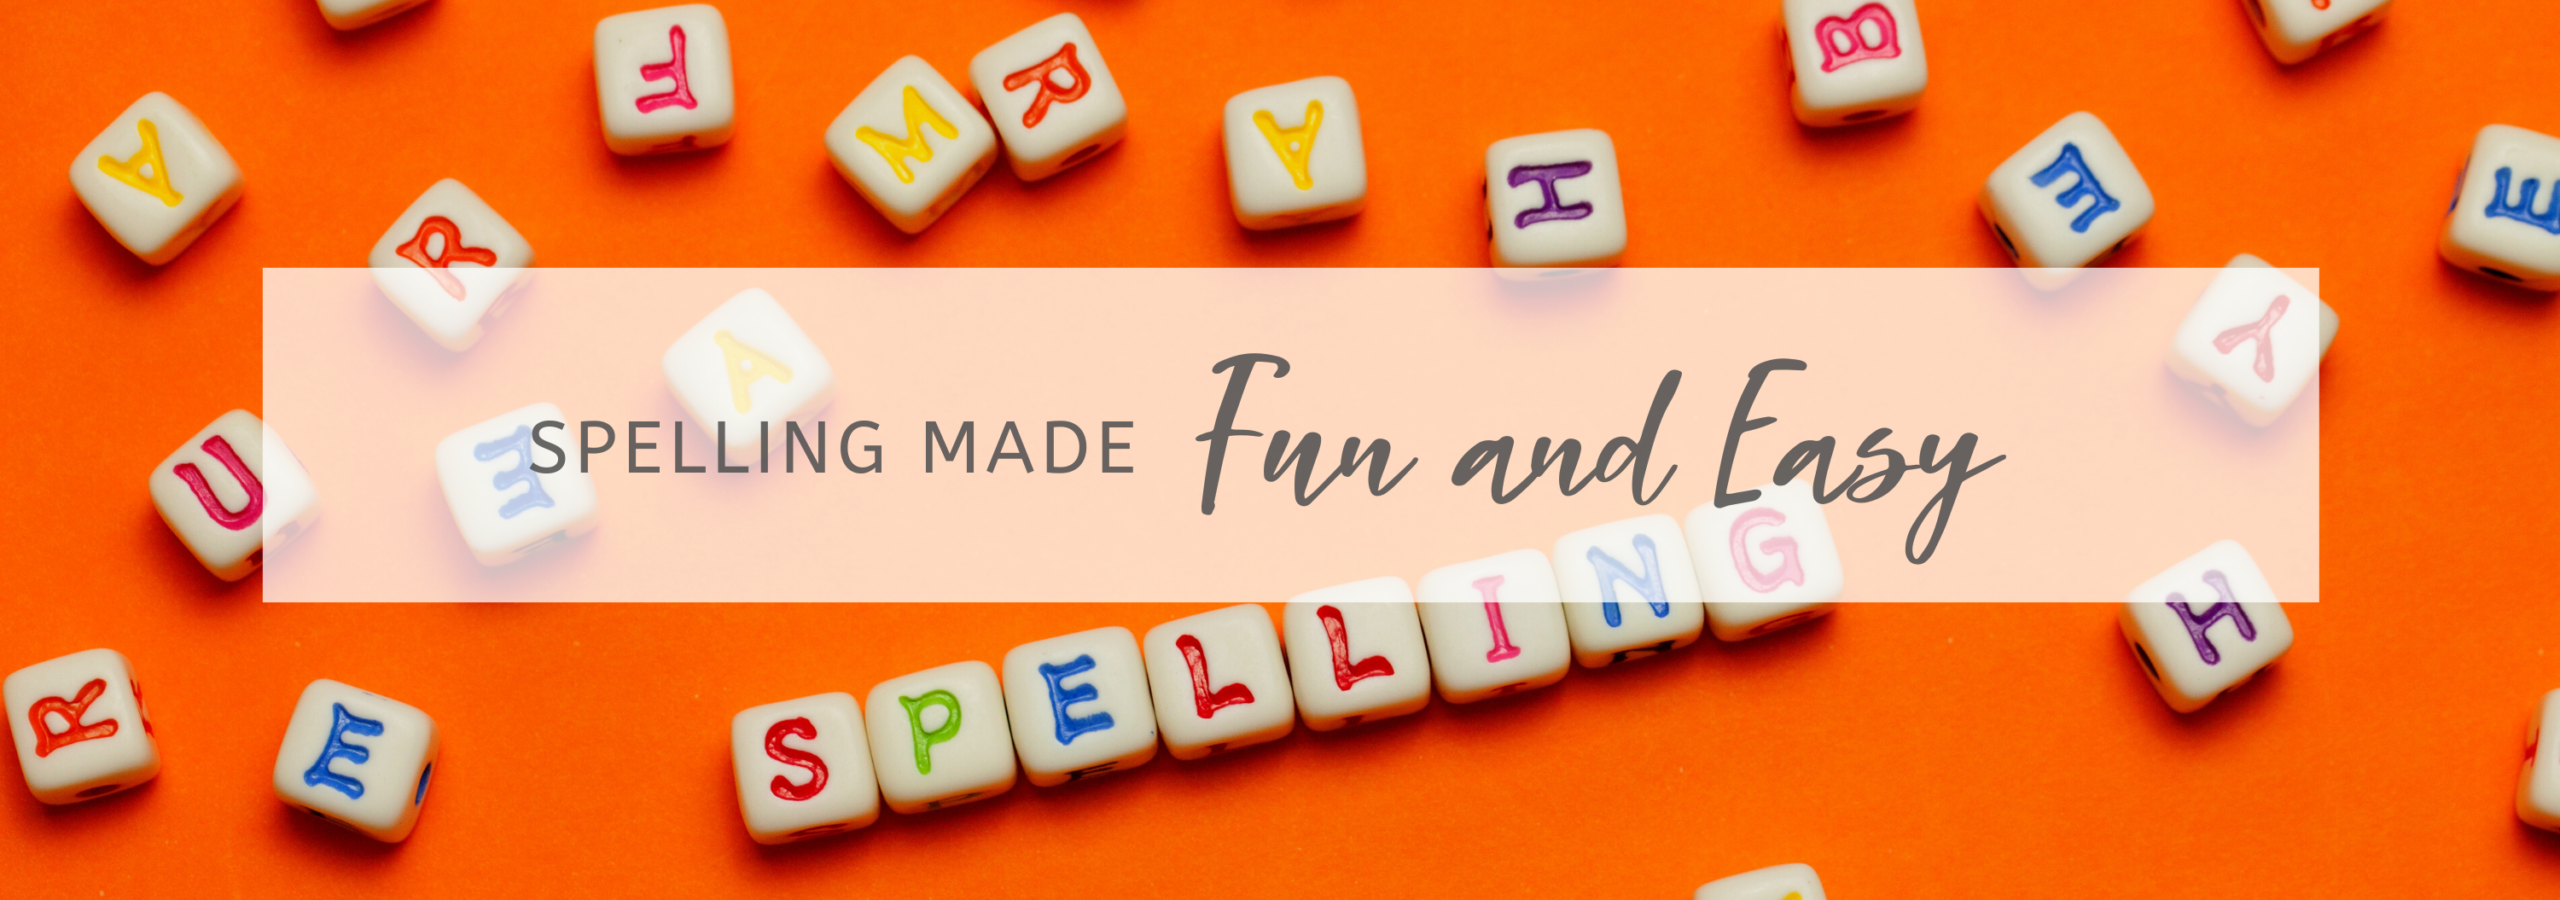 Banner with orange background with letter blocks that says "Spelling made fun and easy"